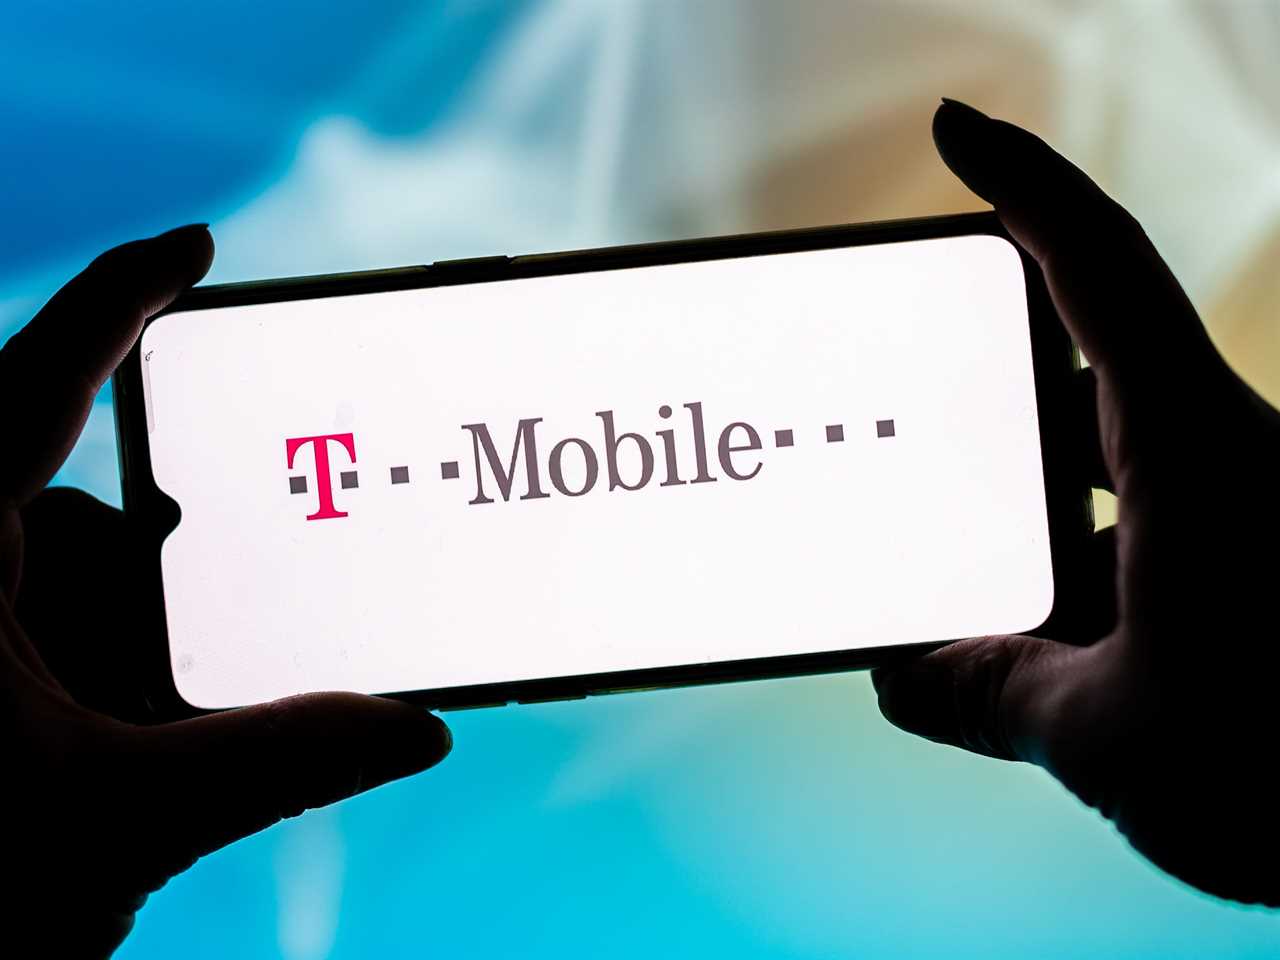 T-Mobile will reportedly fire corporate employees if unvaccinated by April 2.